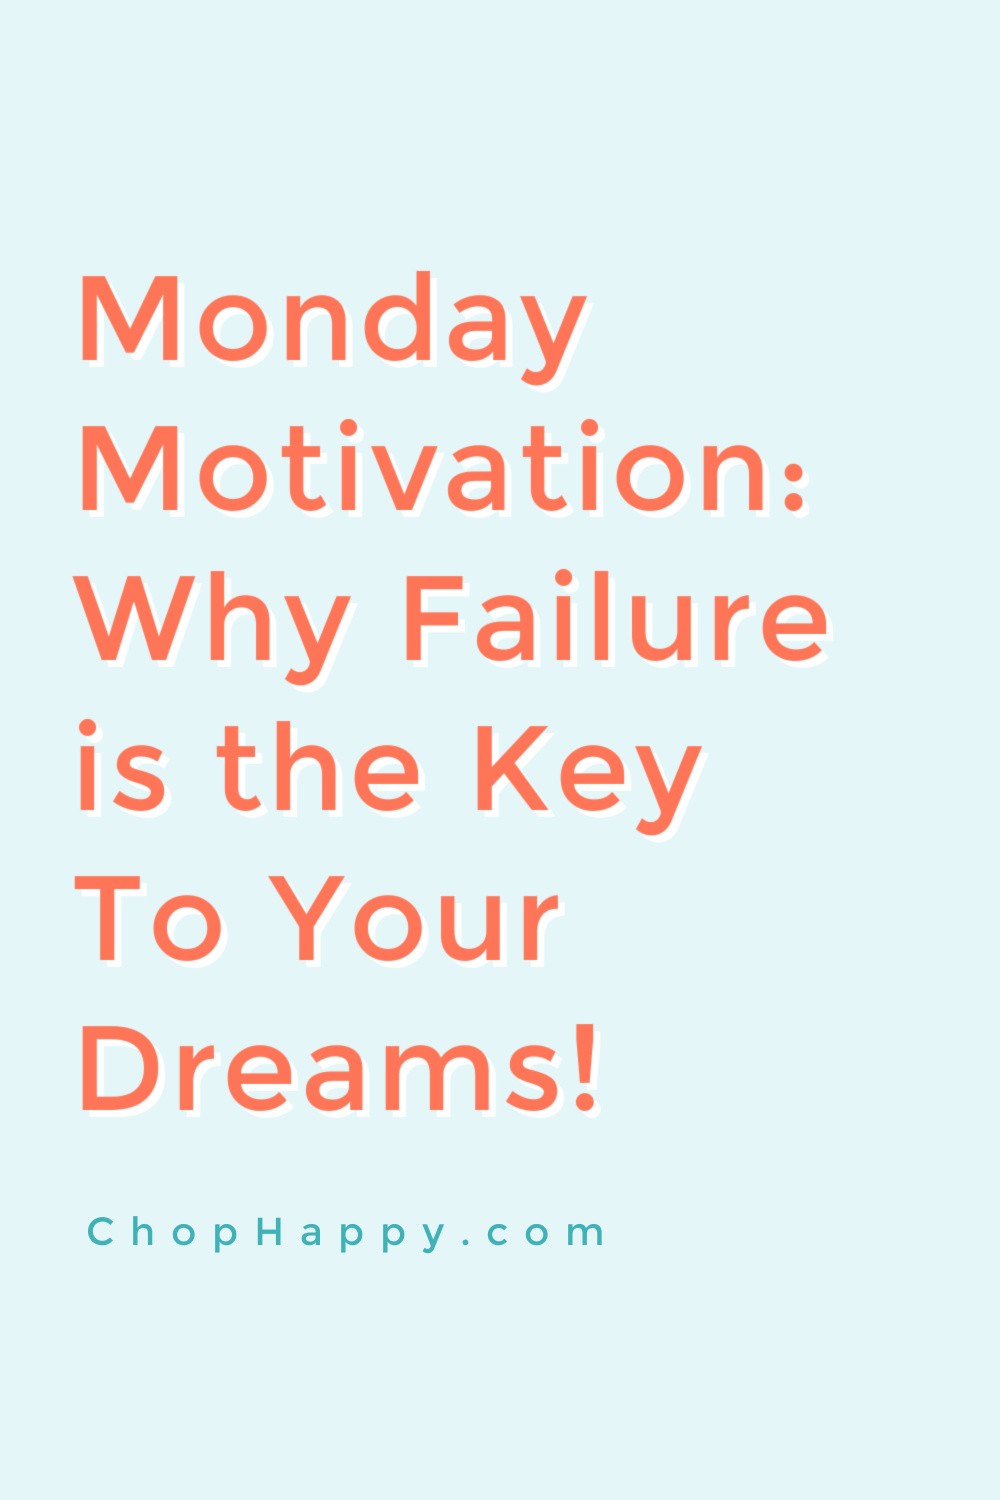 This Weeks Monday Motivation: Why Failure is the Key To Your Dreams! The law of Attraction gives you what you ask for and protects you from what is not right for you! Dream big and learn from your failures. Happy Monday! www.ChopHappy.com #lawofattraction #failure